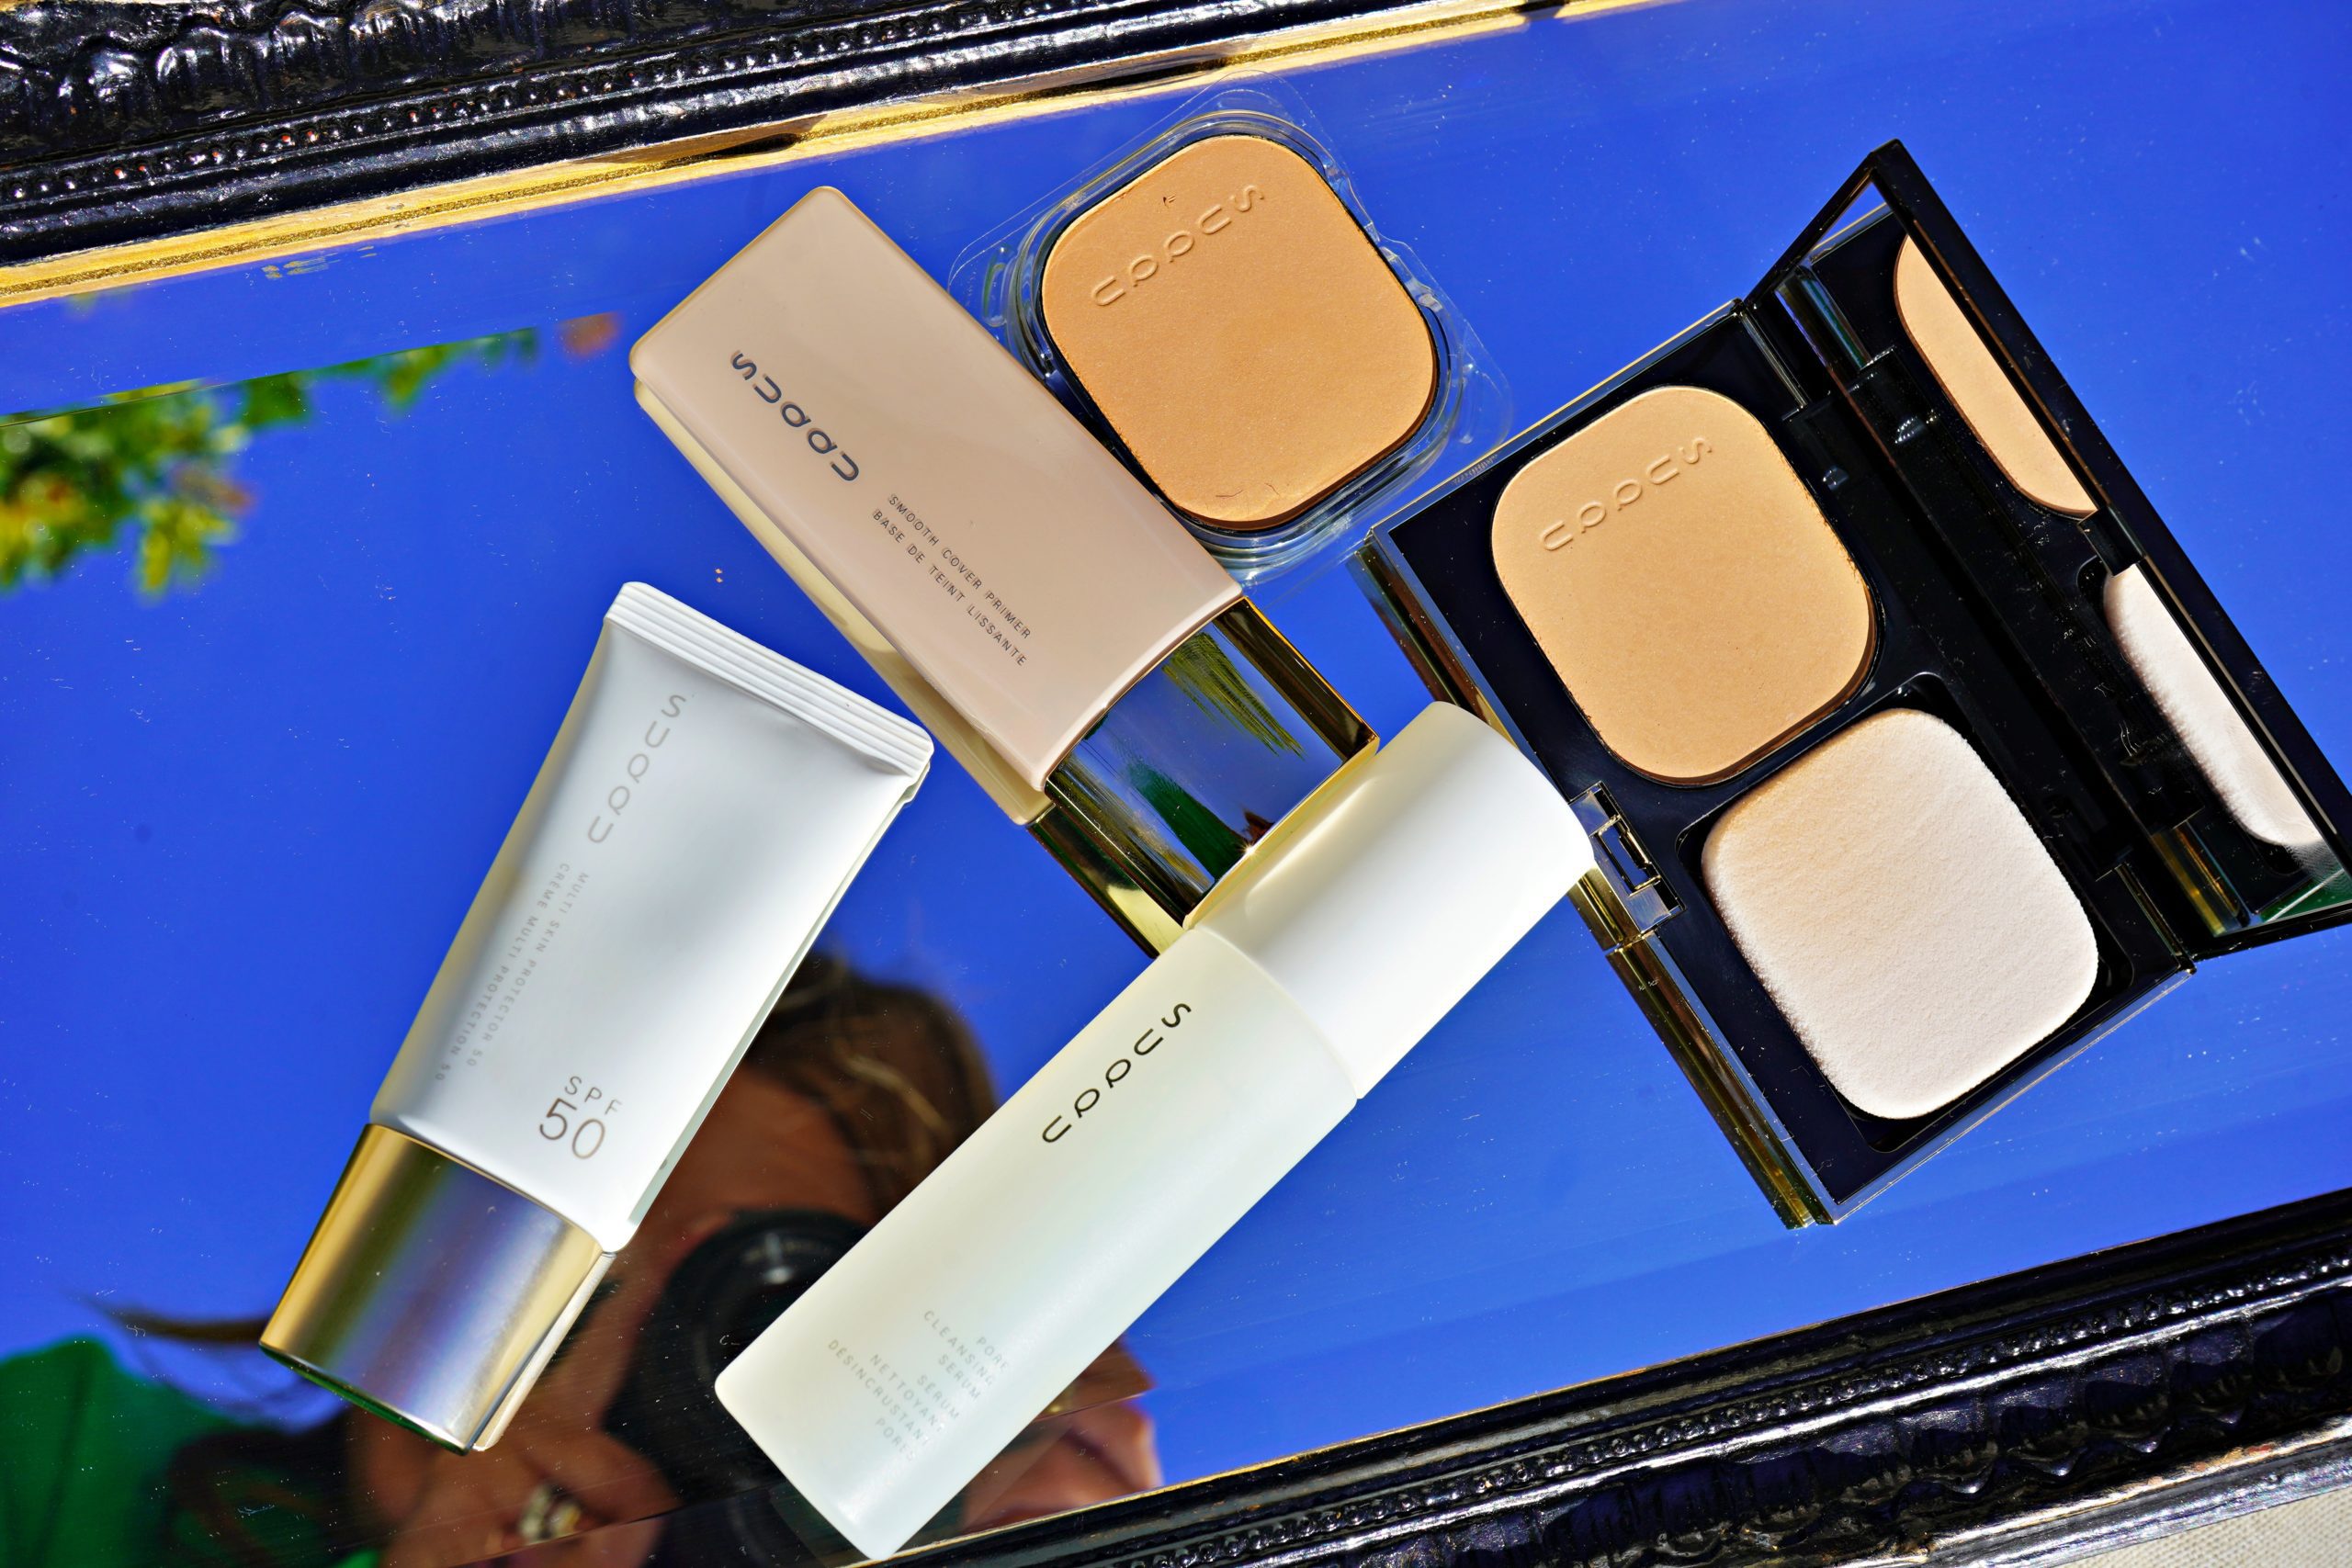 The SUQQU Glow Powder, Fresh Skin and Body Care and Current Base, Brow and Lip Favorites